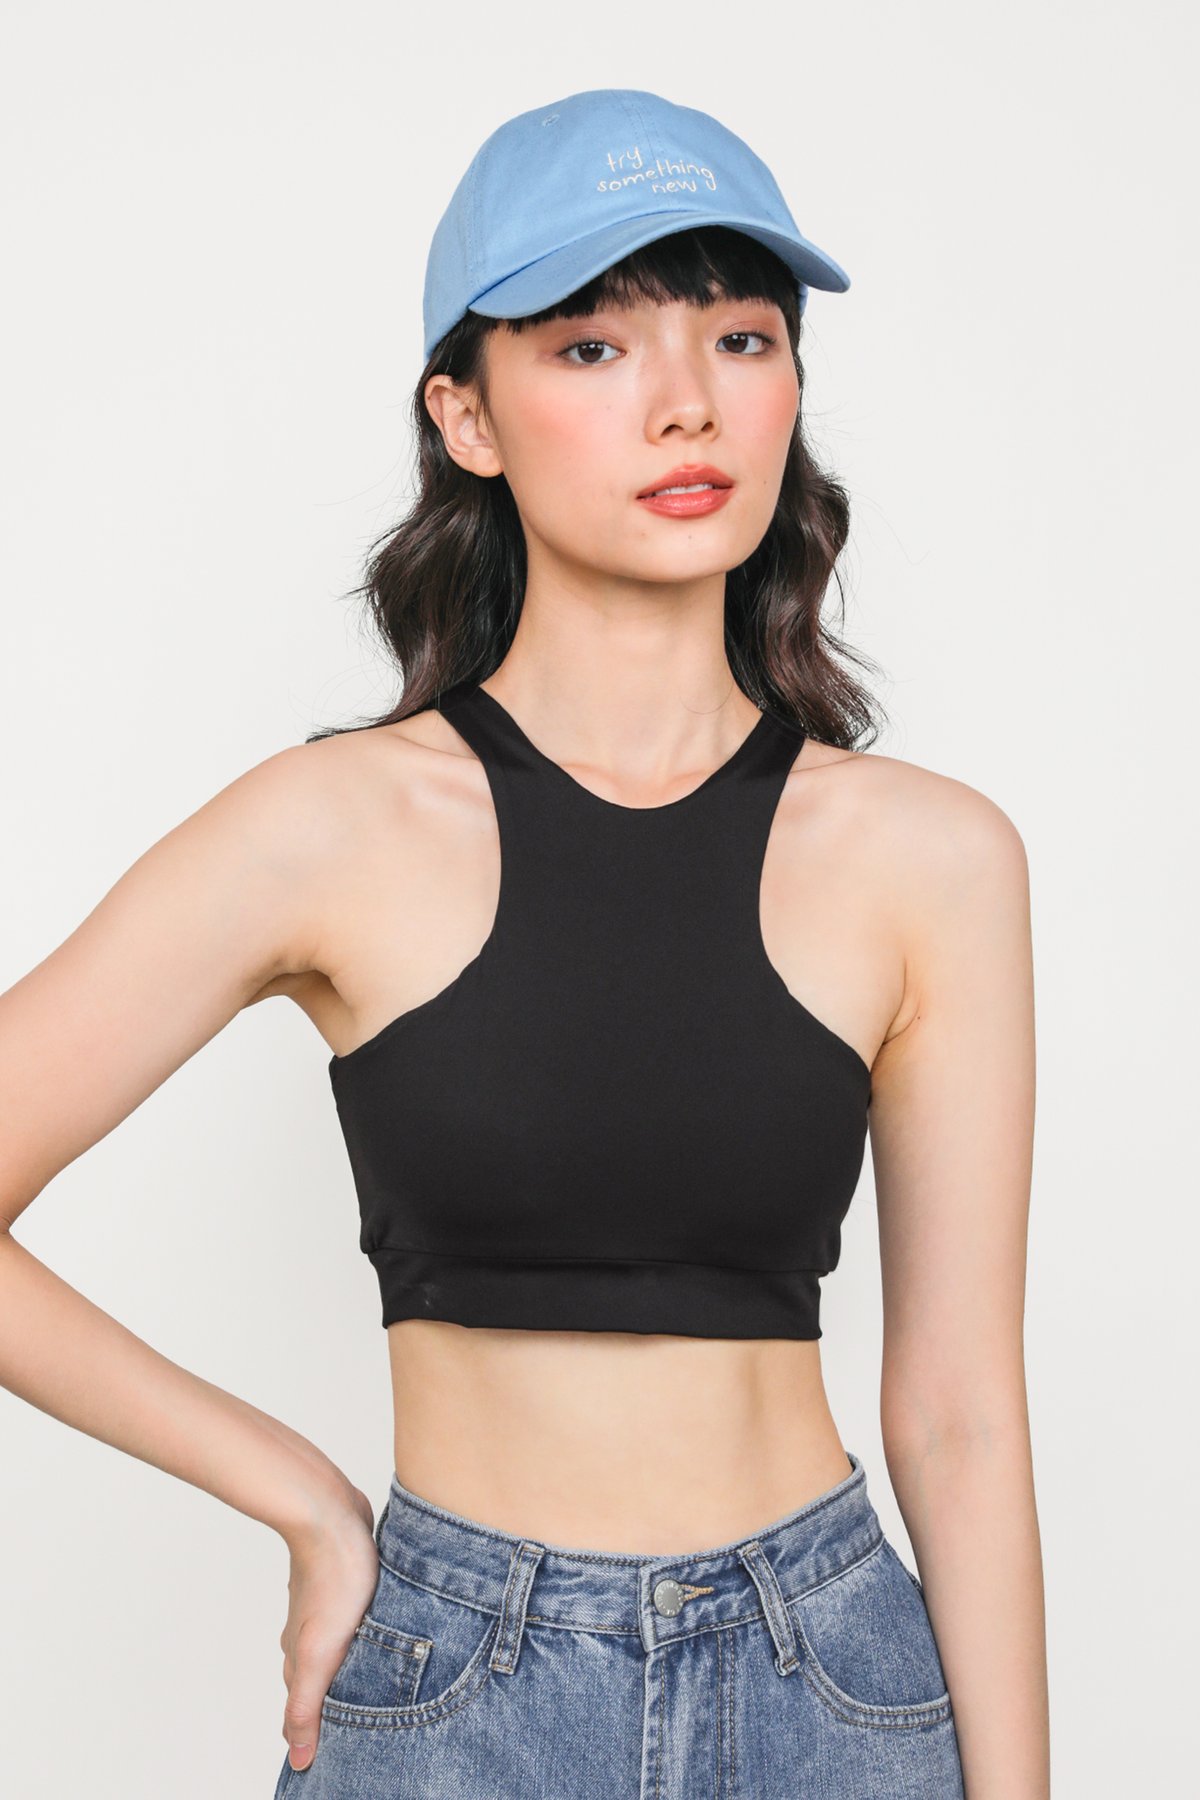 Glittery One Shoulder Crop Top For Women Sleeveless, Ruched, Strappy, And  Bottomed Perfect For Sports And Casual Wear From Bassabet2021, $14.21